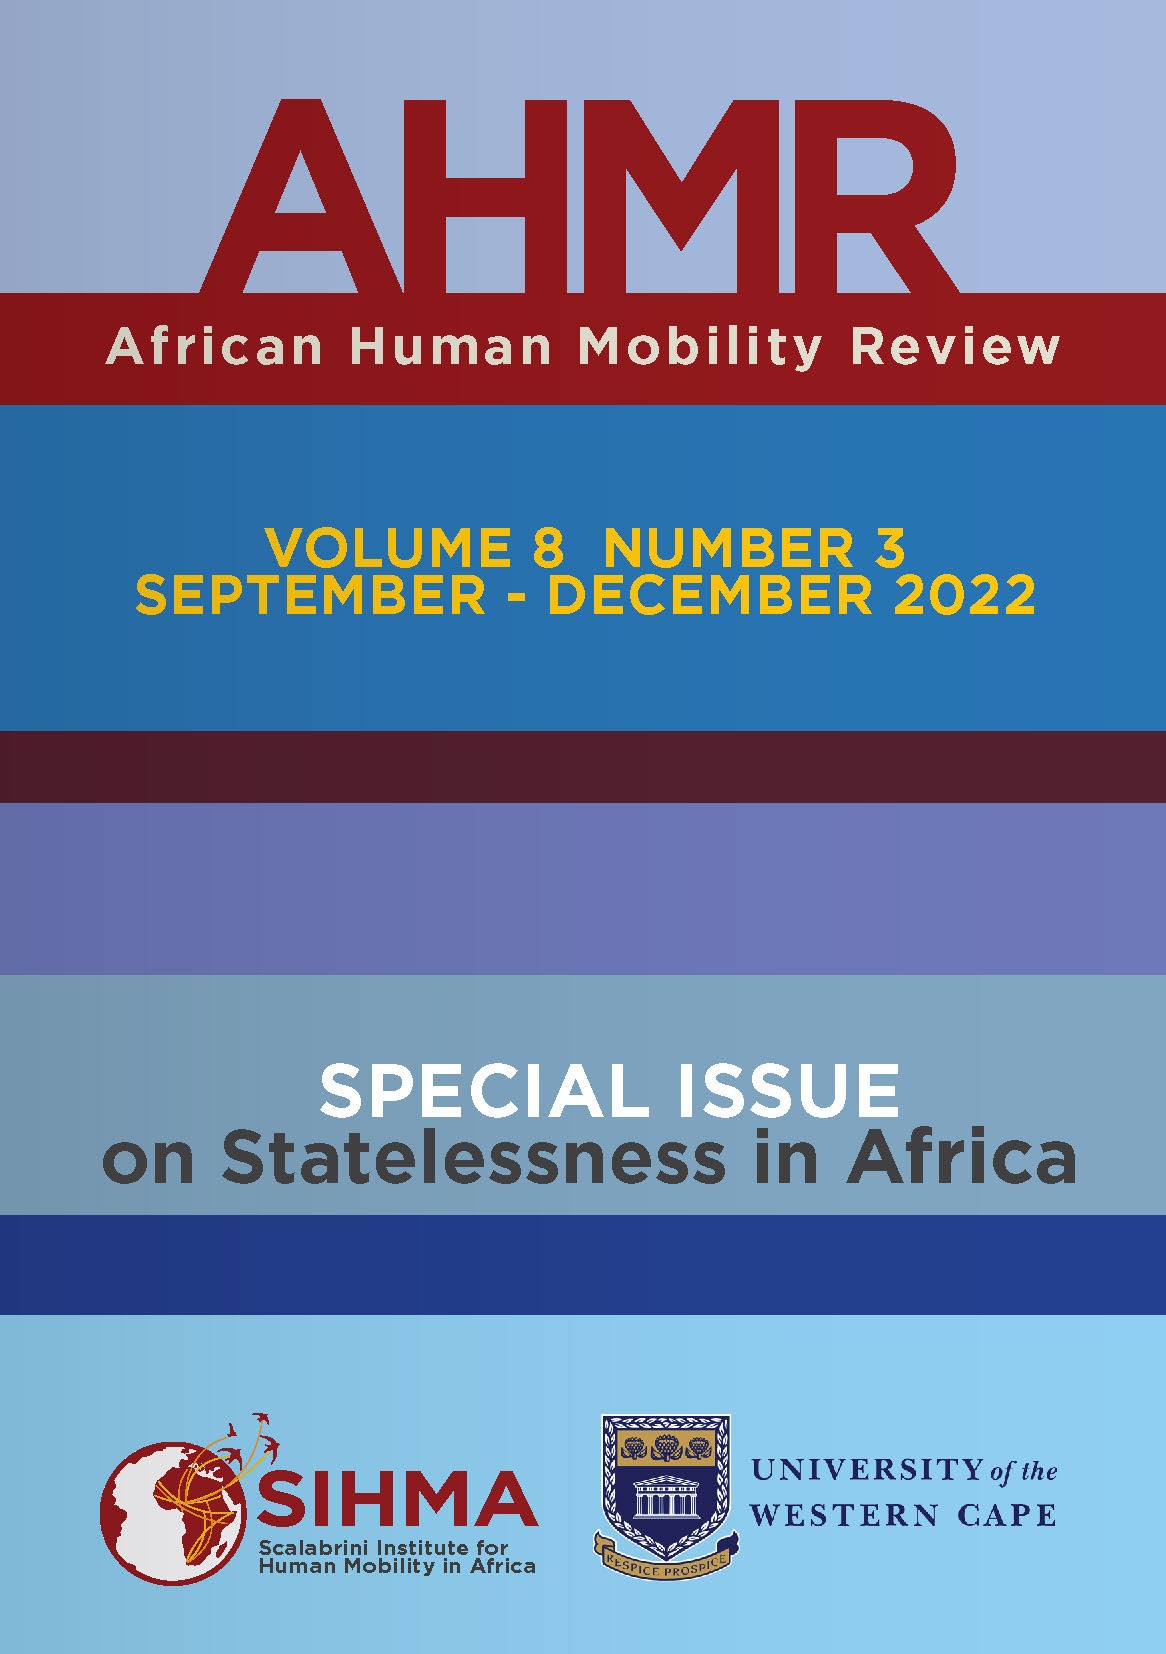 https://www.sihma.org.za/photos/shares/AHMR cover 8-3 special issue online.jpg